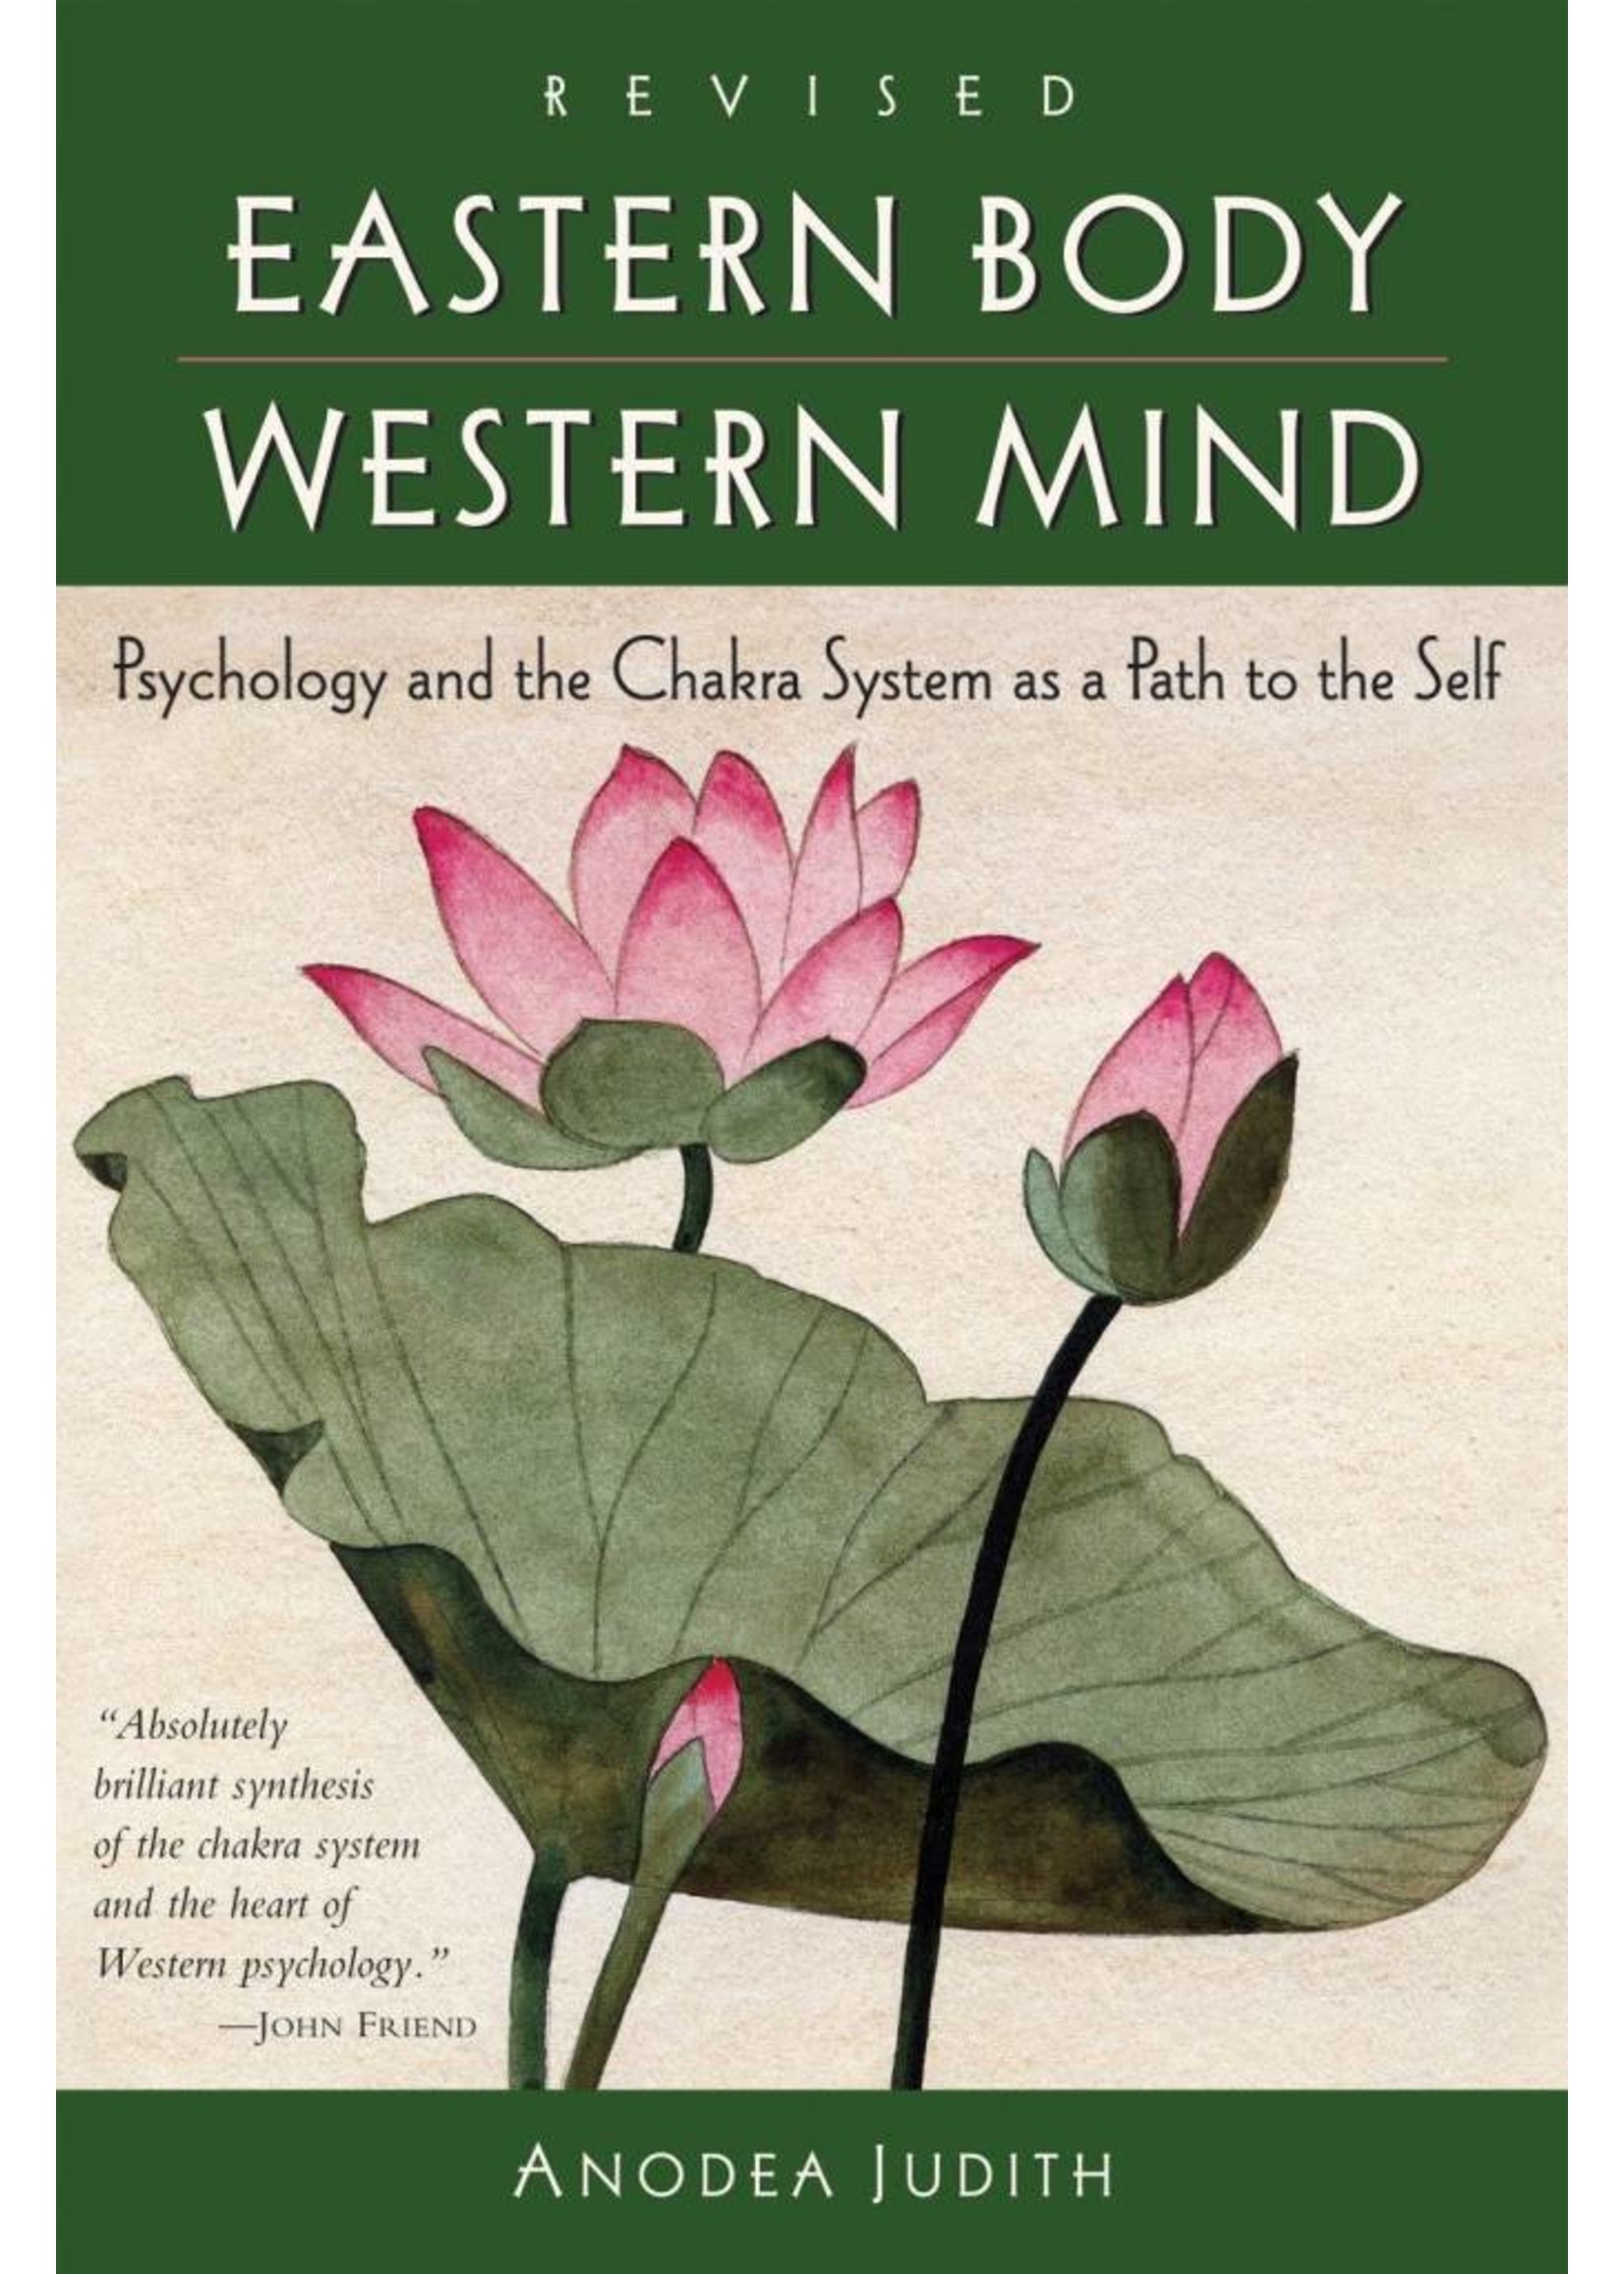 Eastern Body, Western Mind | Psychology and the Chakra System As a Path to the Self